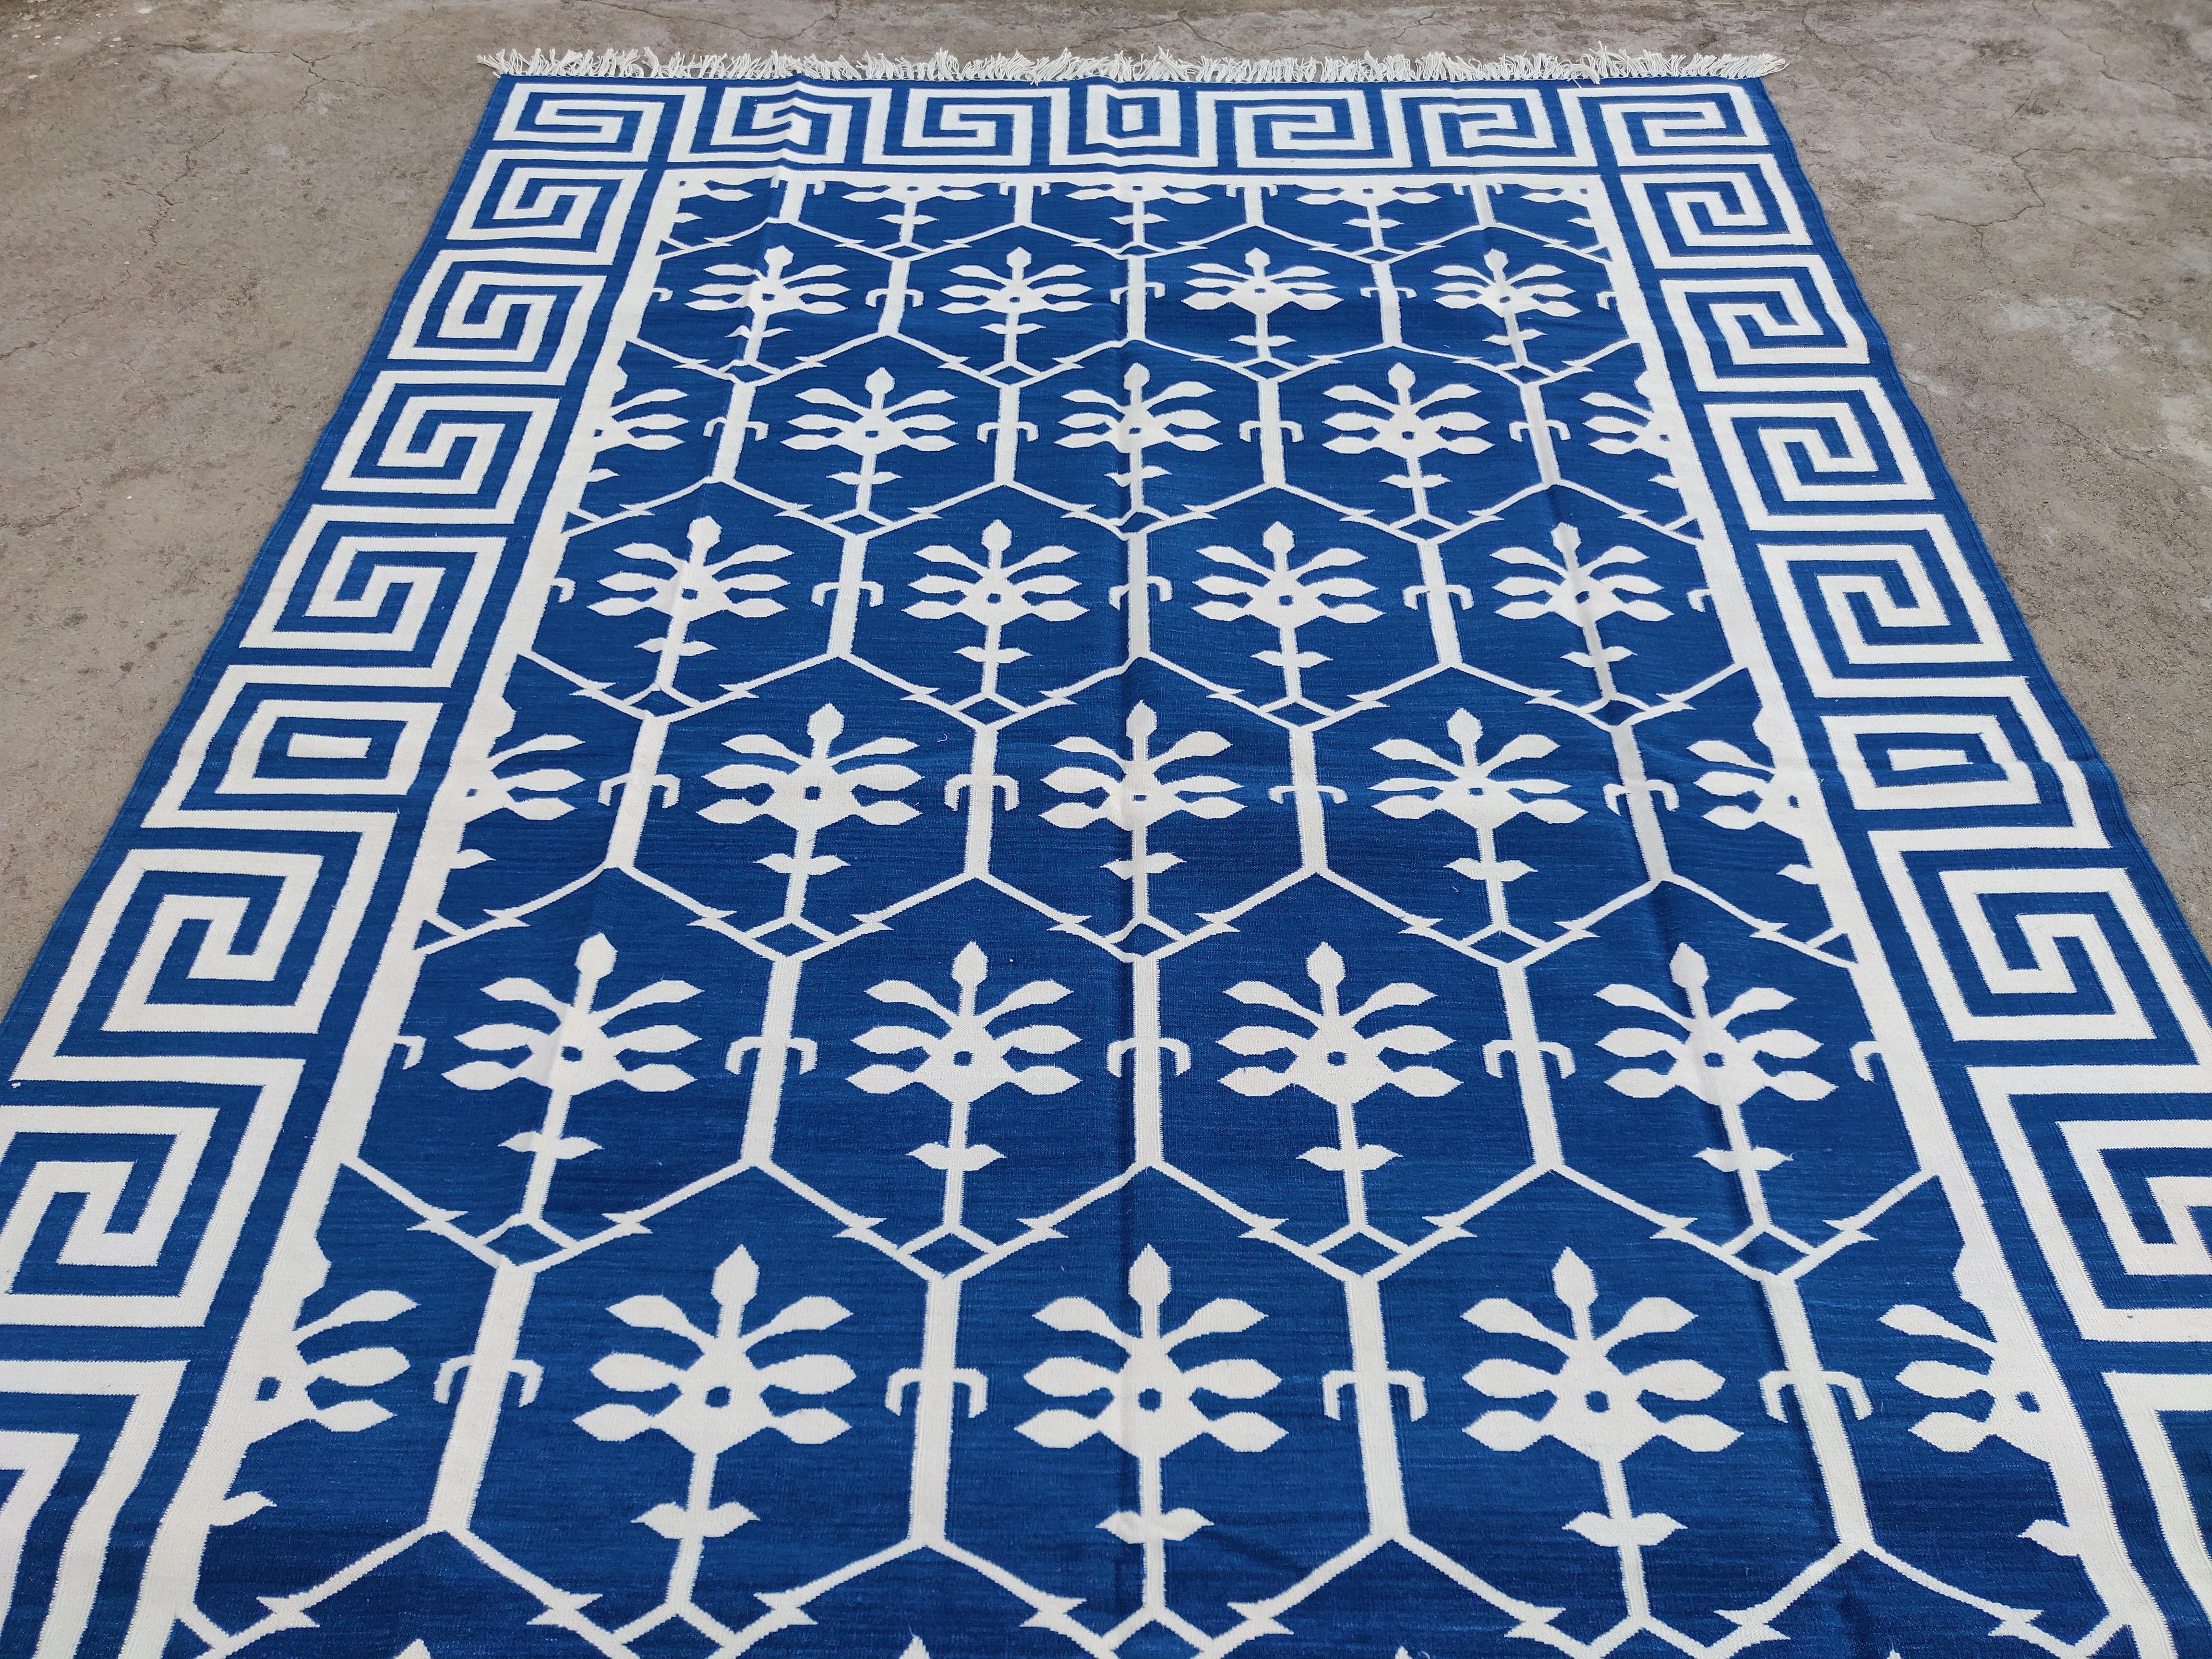 Contemporary Handmade Cotton Area Flat Weave Rug, Blue And White Flower Indian Dhurrie-6x9 For Sale